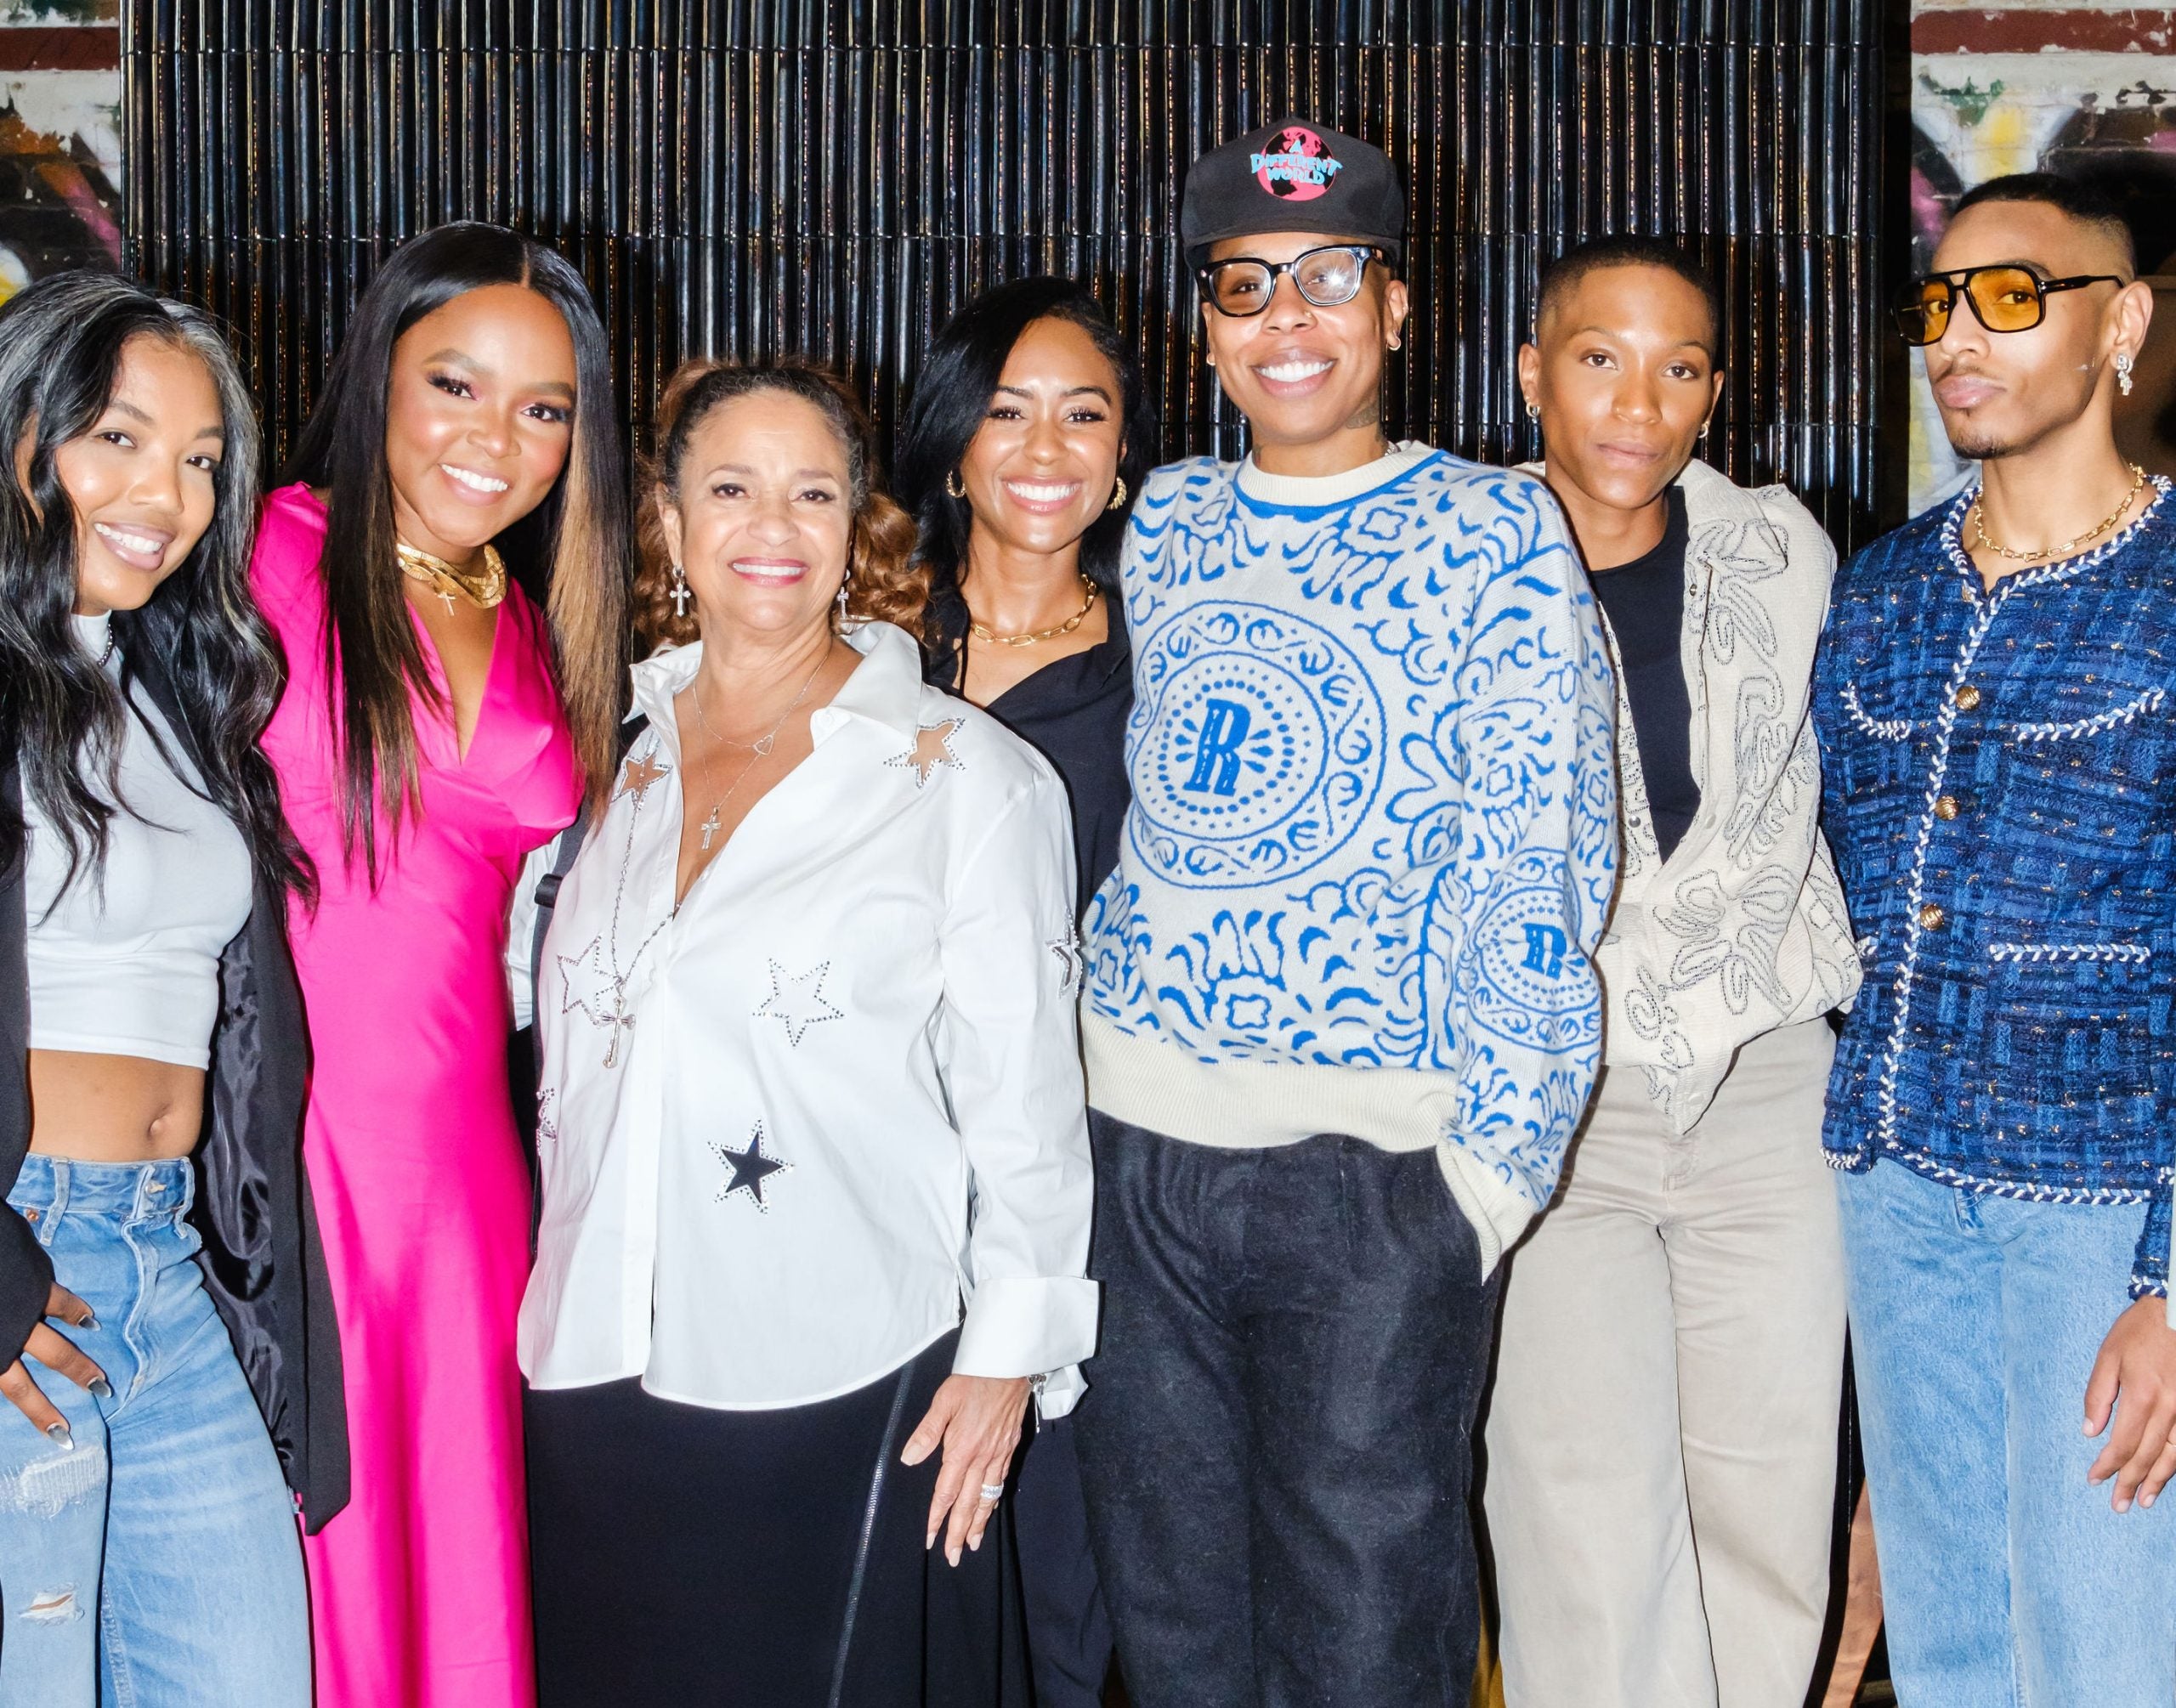 Debbie Allen Gives A Lesson On How To Use Your Power at Hillman Grad Women On The Rise Event 